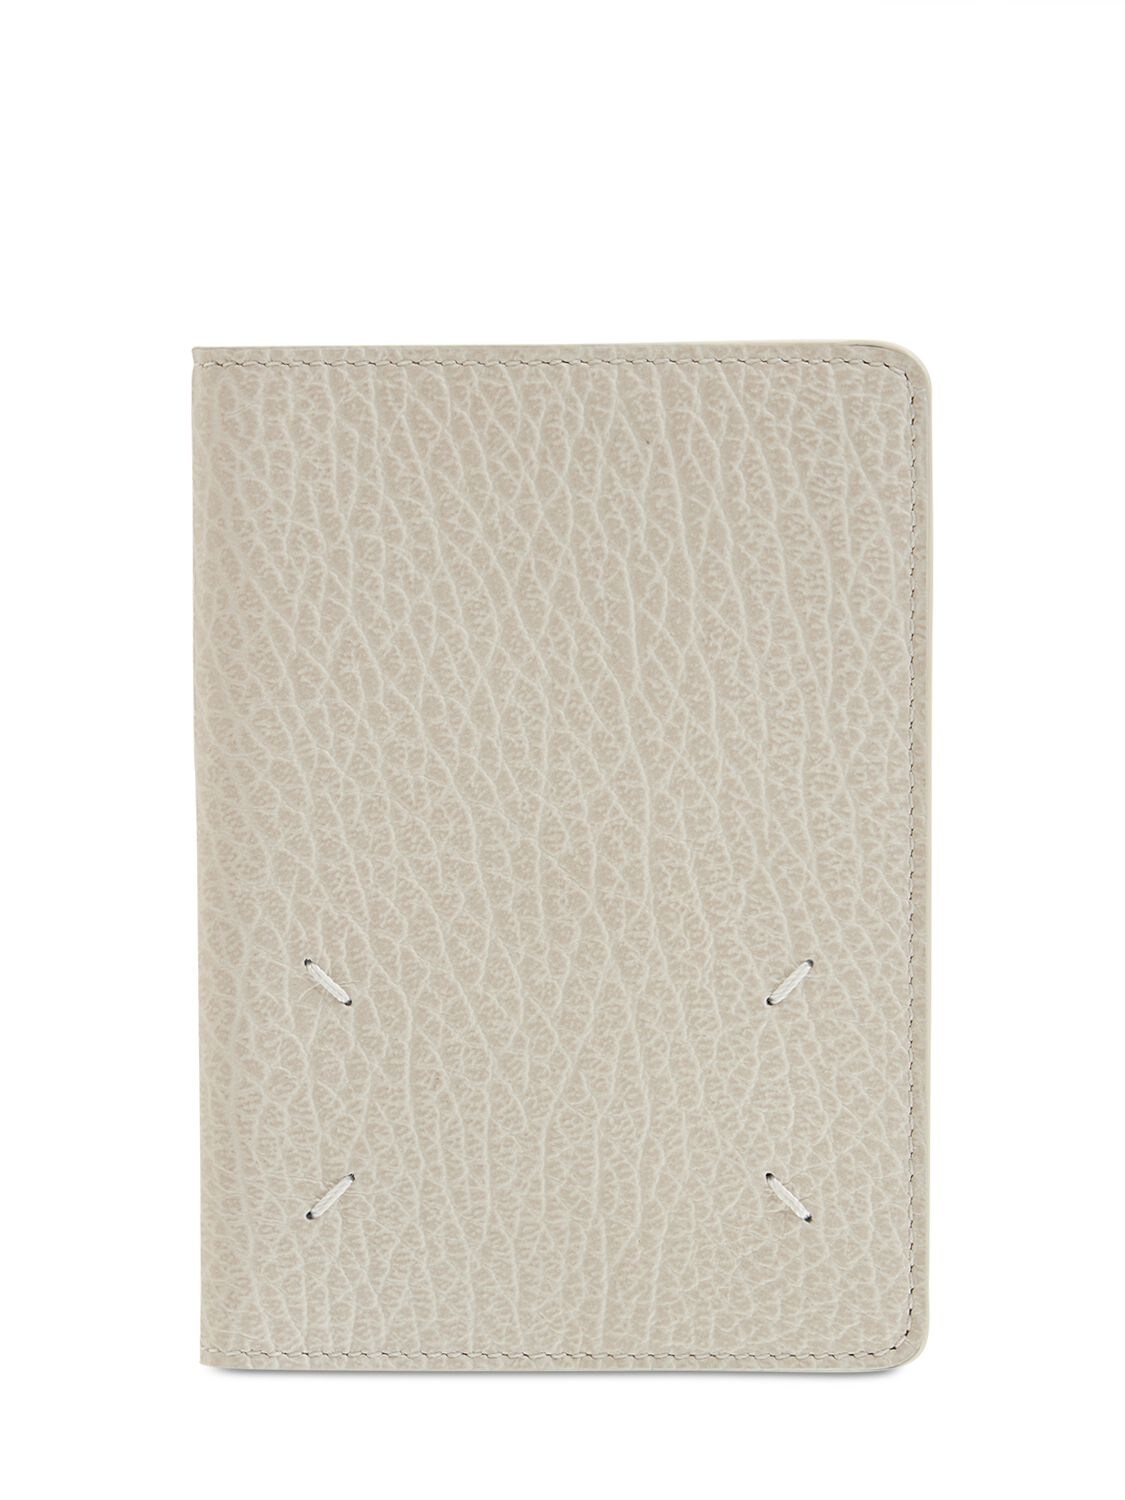 Grained Leather Passport Cover